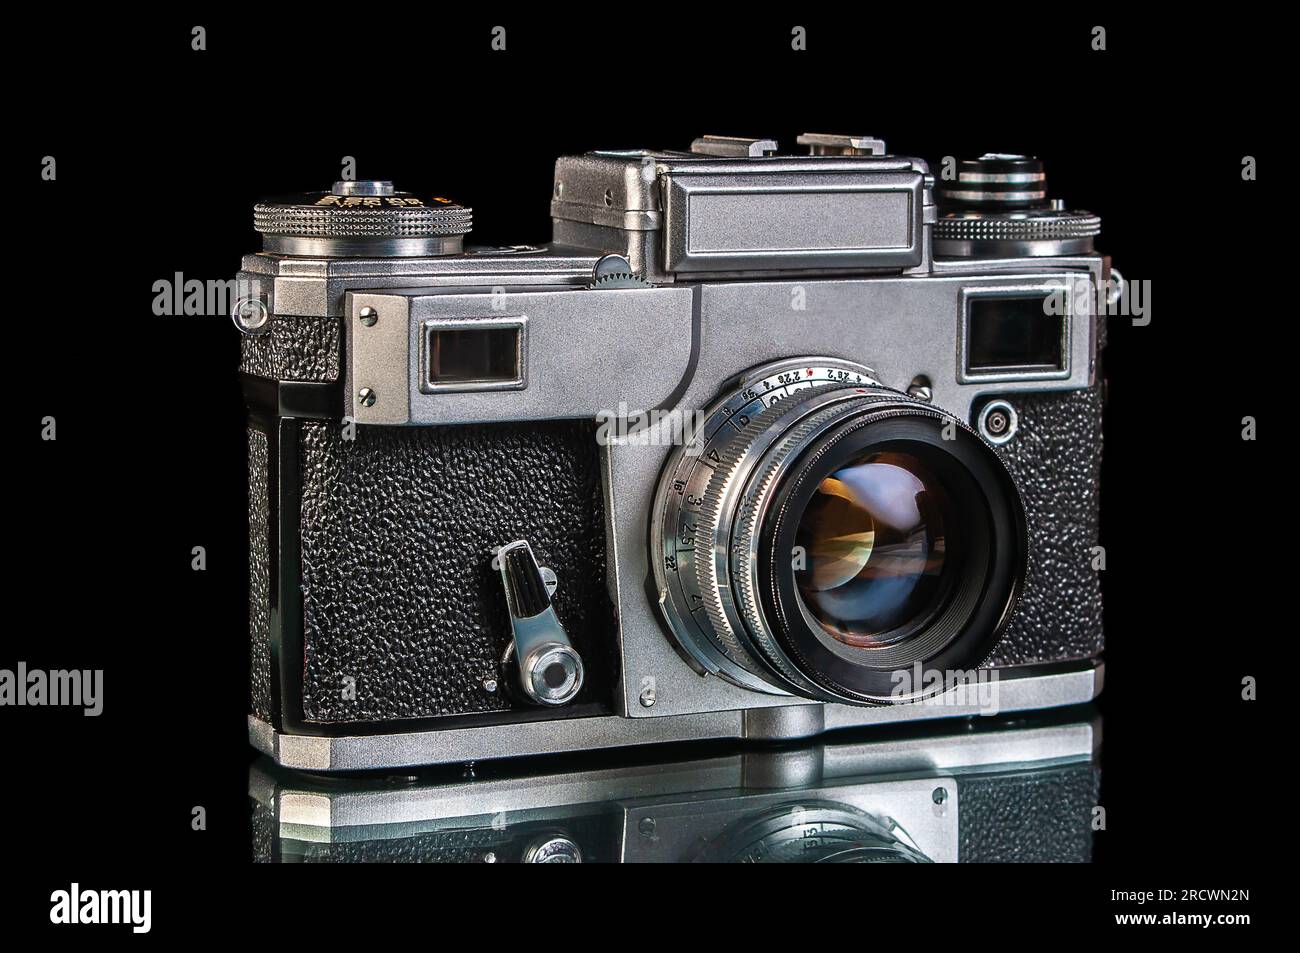 An old 35mm analog camera with a lens attached to it Stock Photo